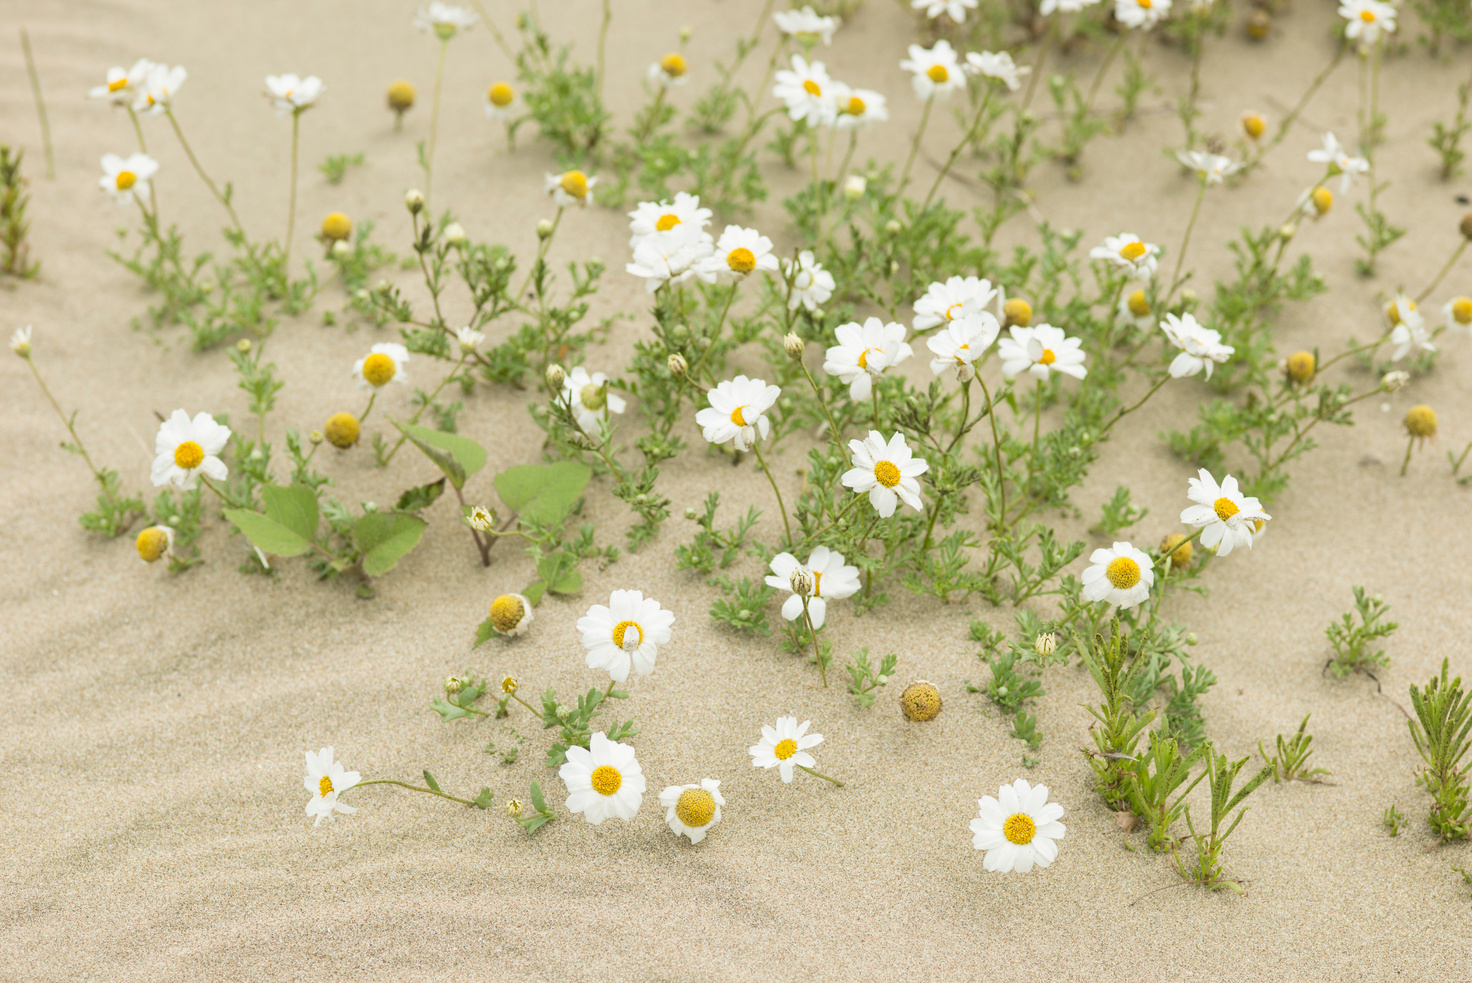 Daisy flowers blooming on a sand desert